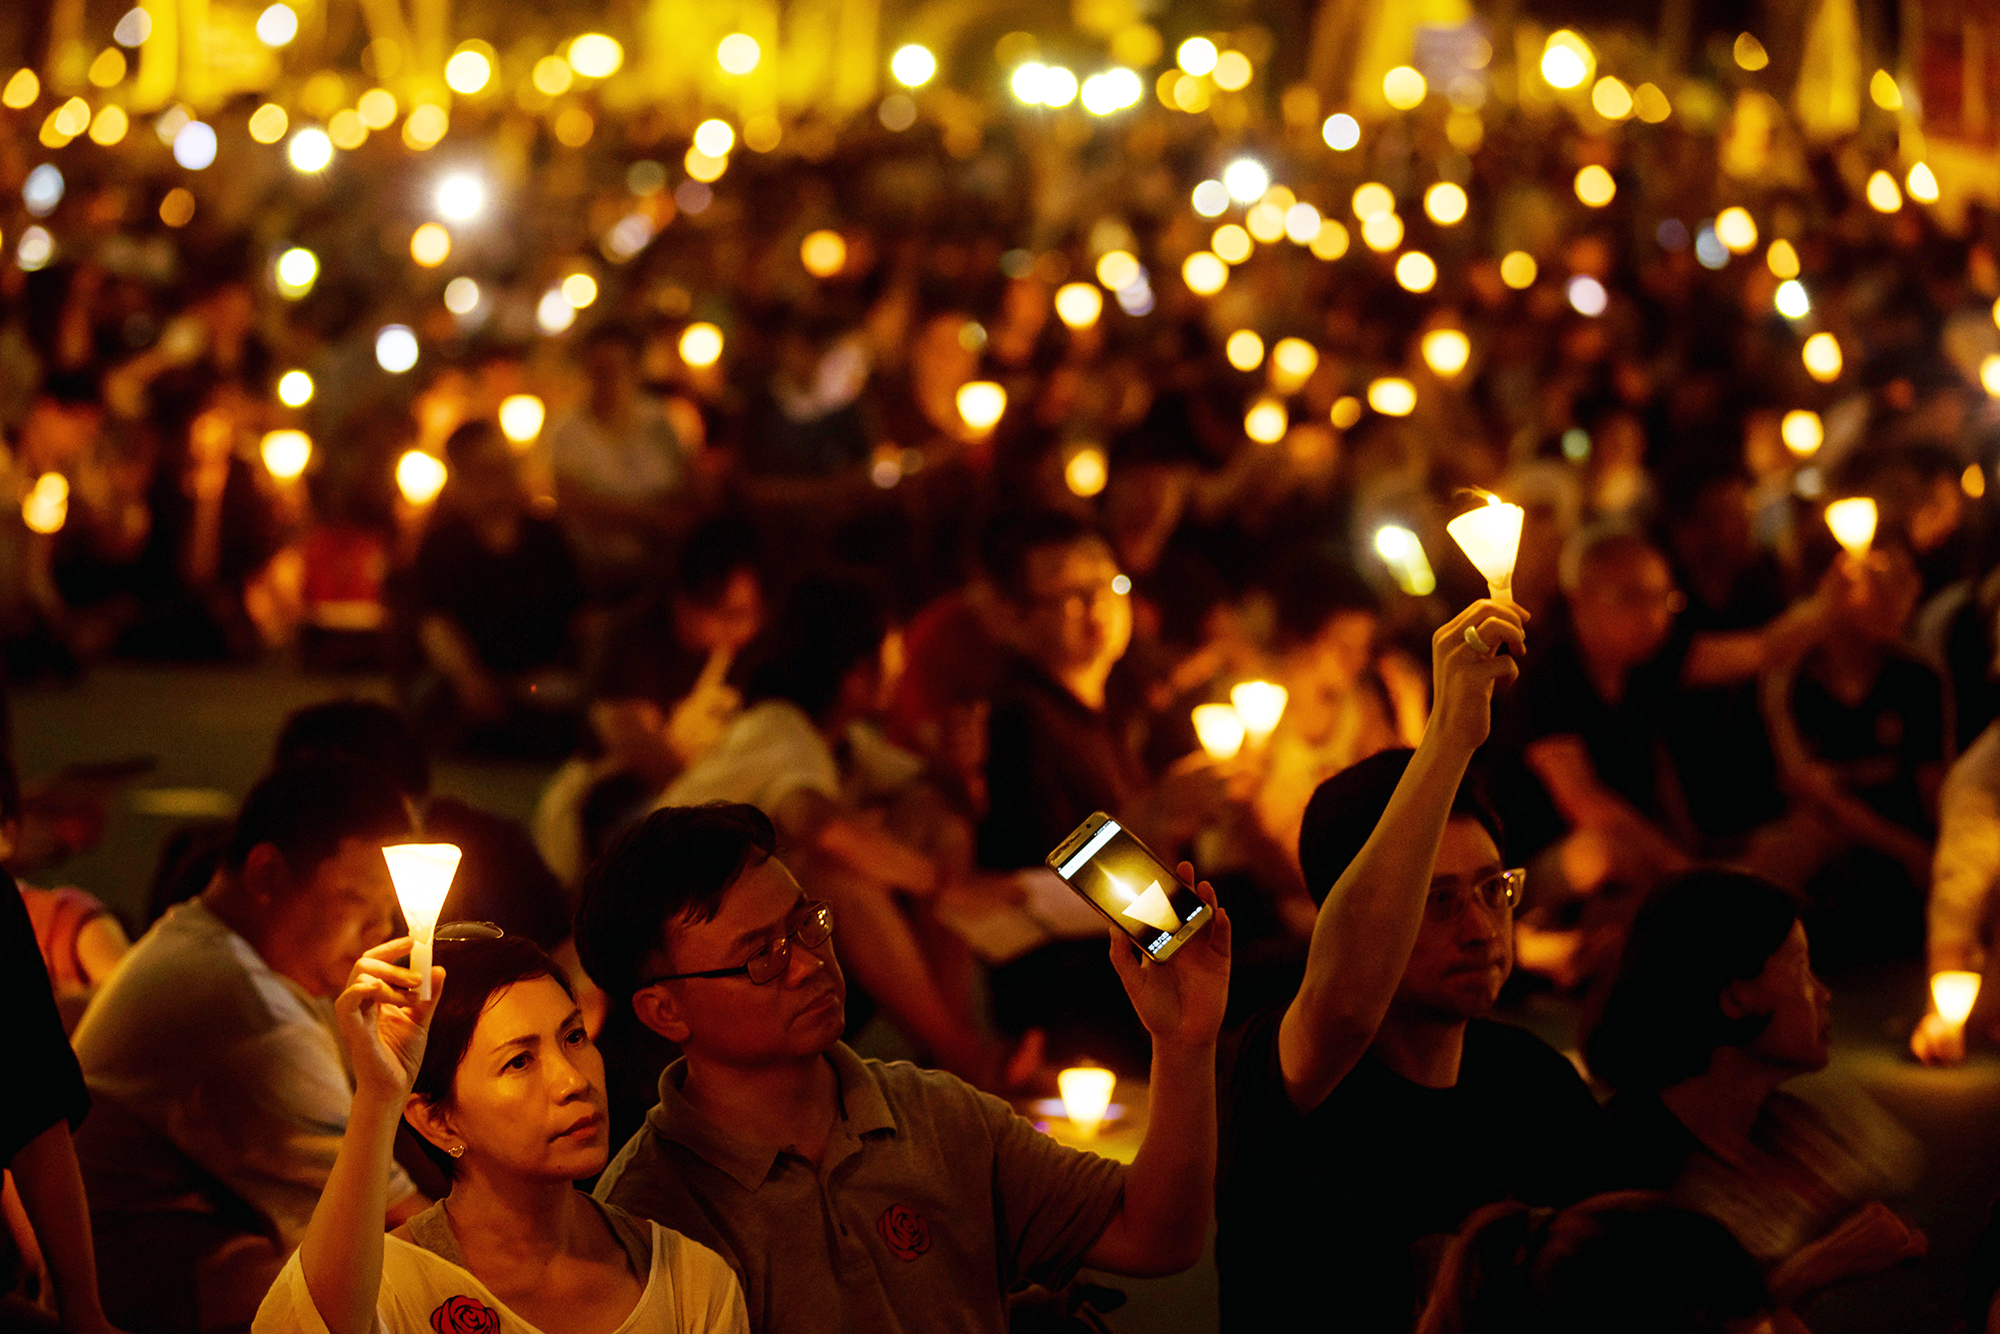 Demonstrators attend a candlelight vigil at Victoria Park in Hong Kong, on June 4, 2017. (Paul Yeung—Getty Images)